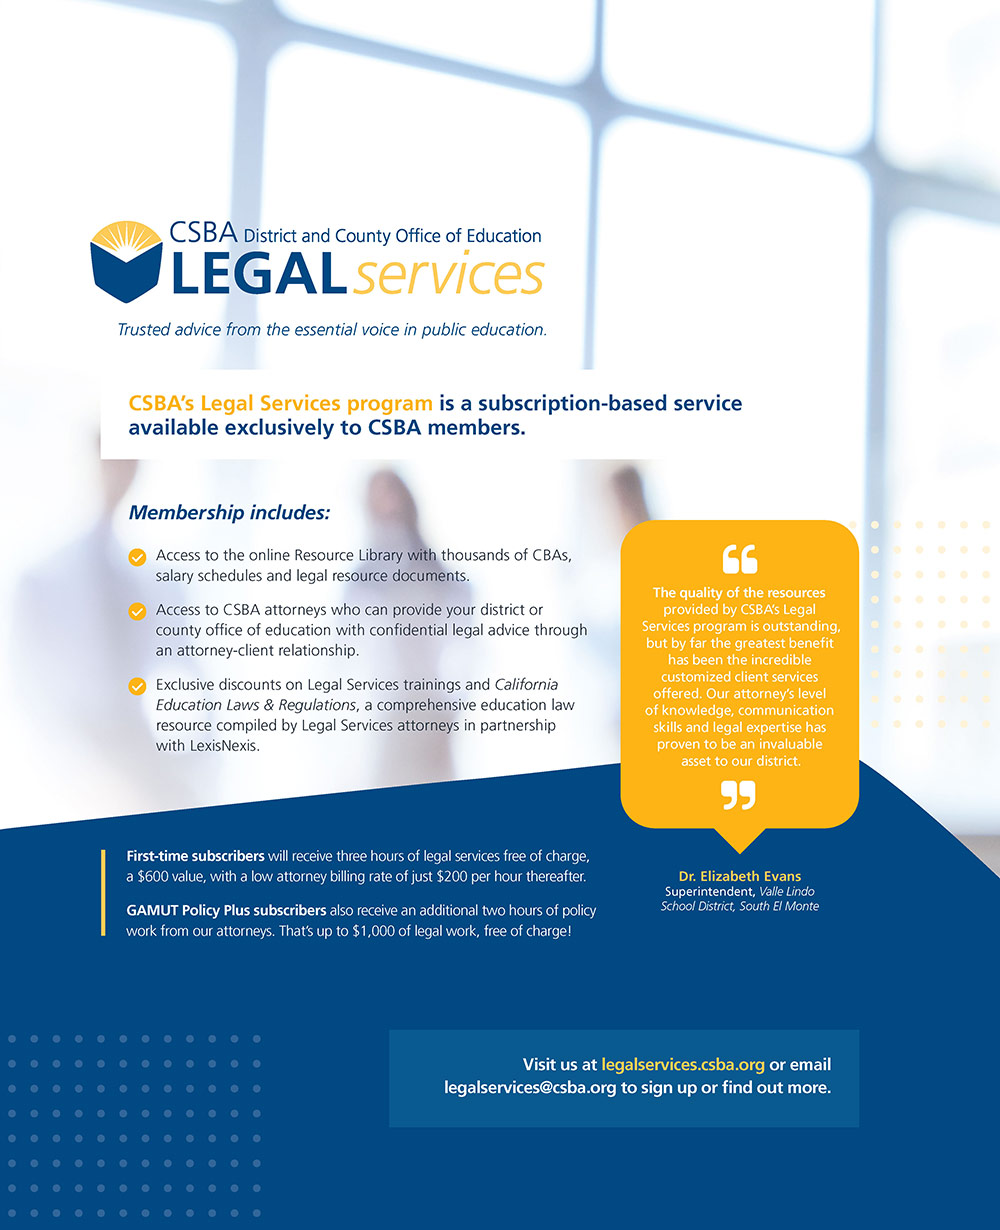 CSBA District and County Office of Education Legal Services Advertisement